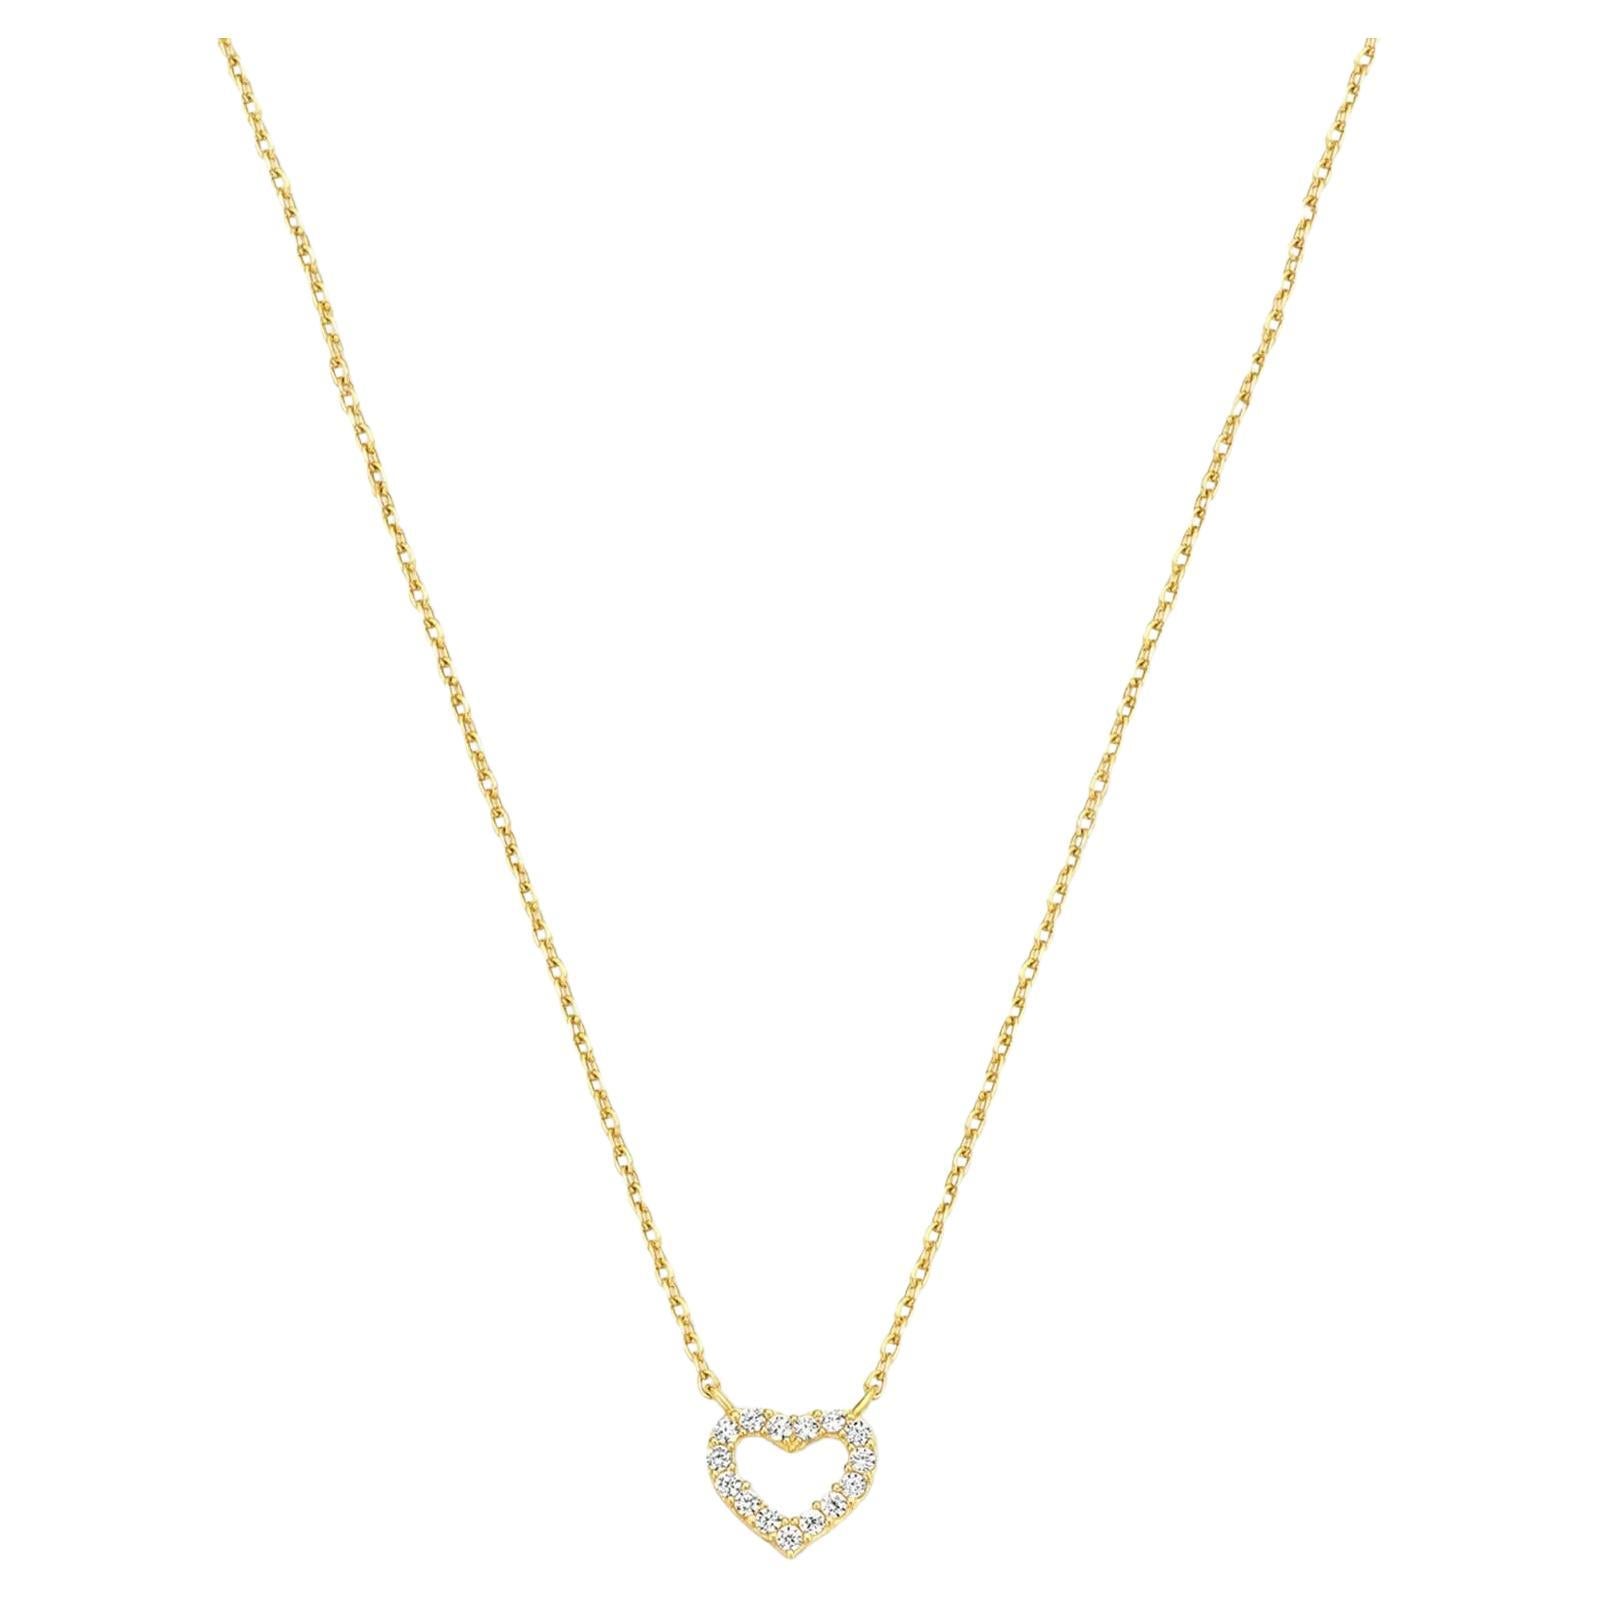 14k Solid Gold Heart Pendant Necklace, Tiny Heart Charm Gold Chain Necklace. For Sale